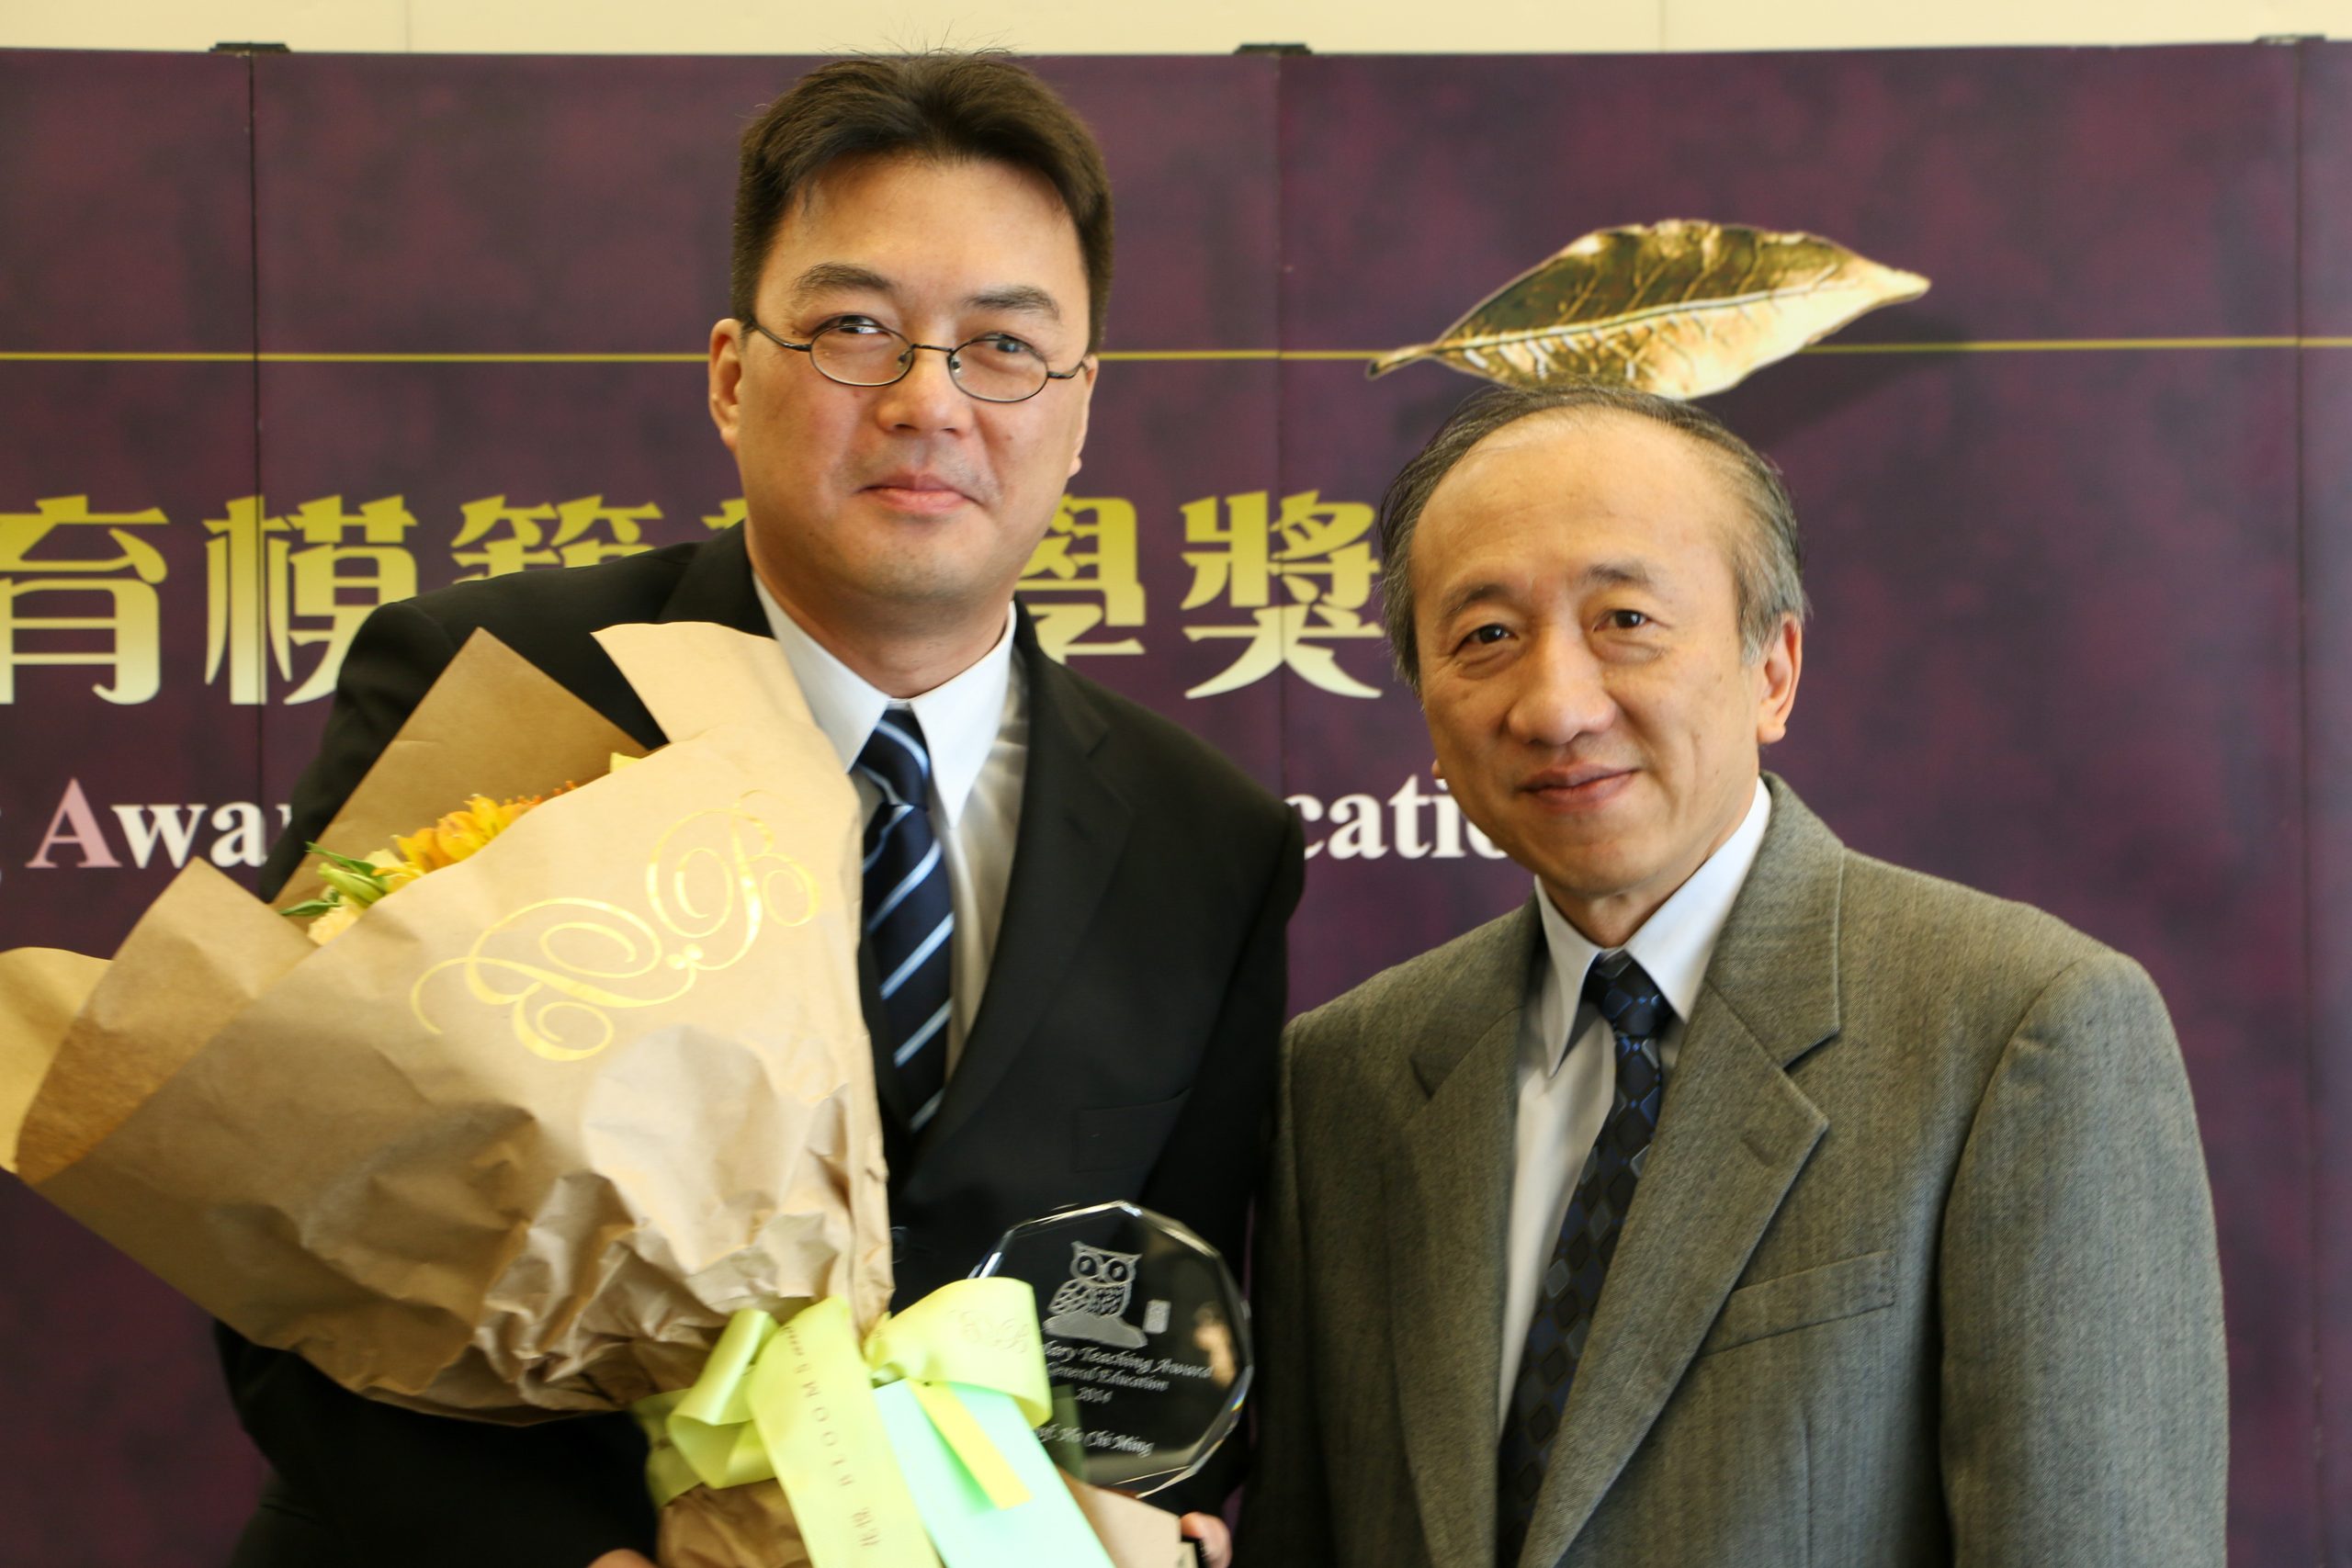 Presentation of Exemplary Teaching Award in General Education to Professor Ho Chi Ming